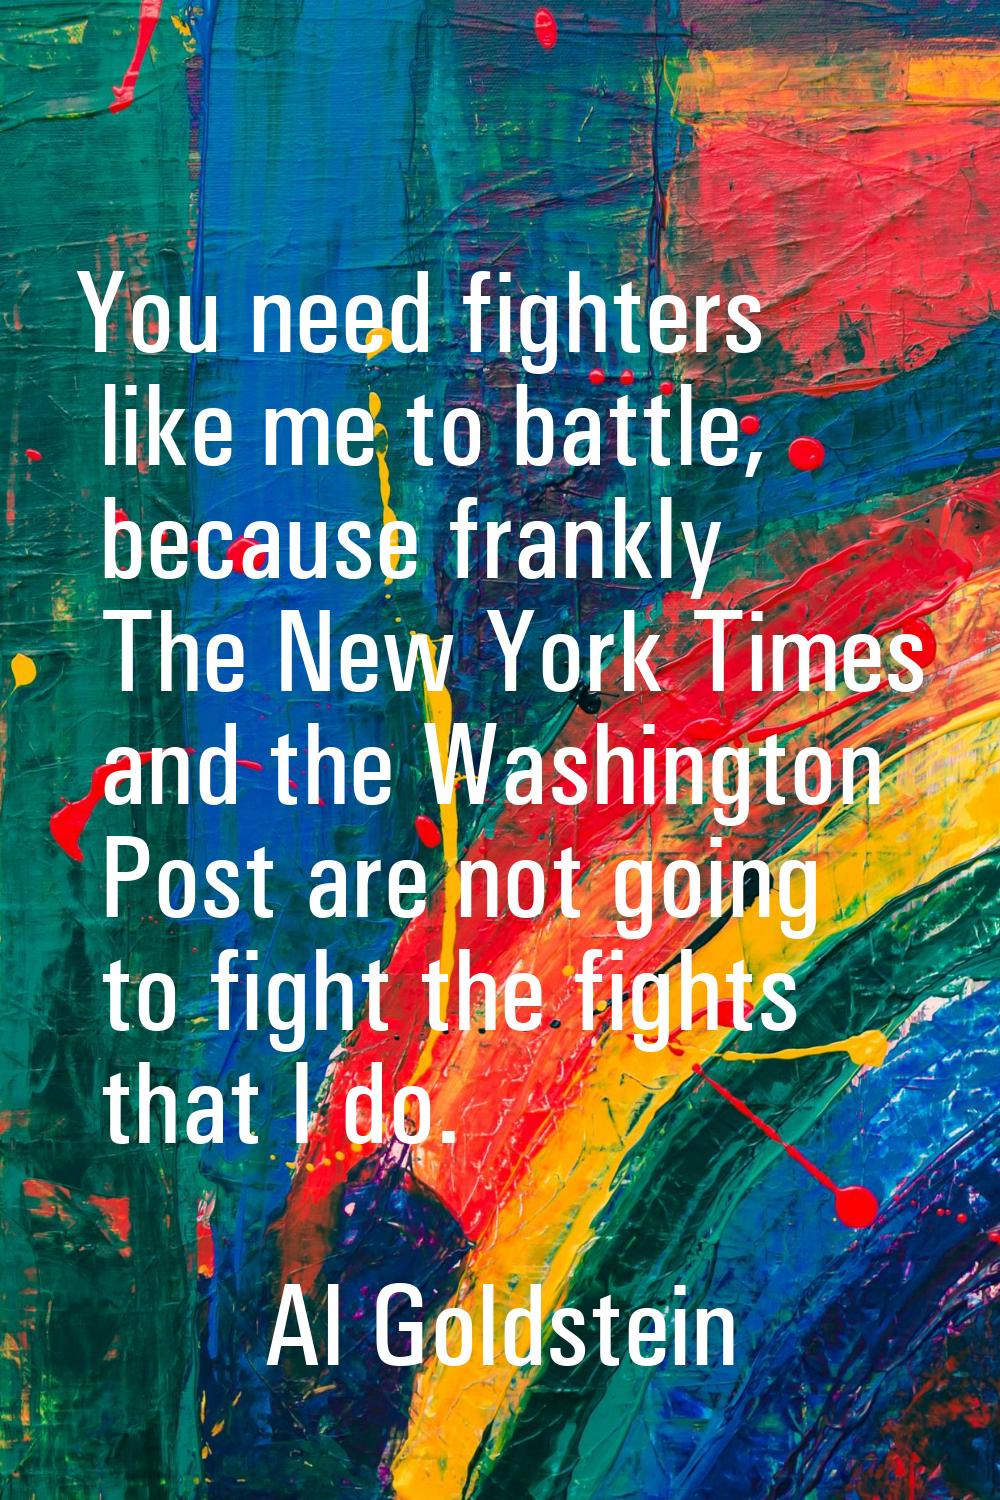 You need fighters like me to battle, because frankly The New York Times and the Washington Post are